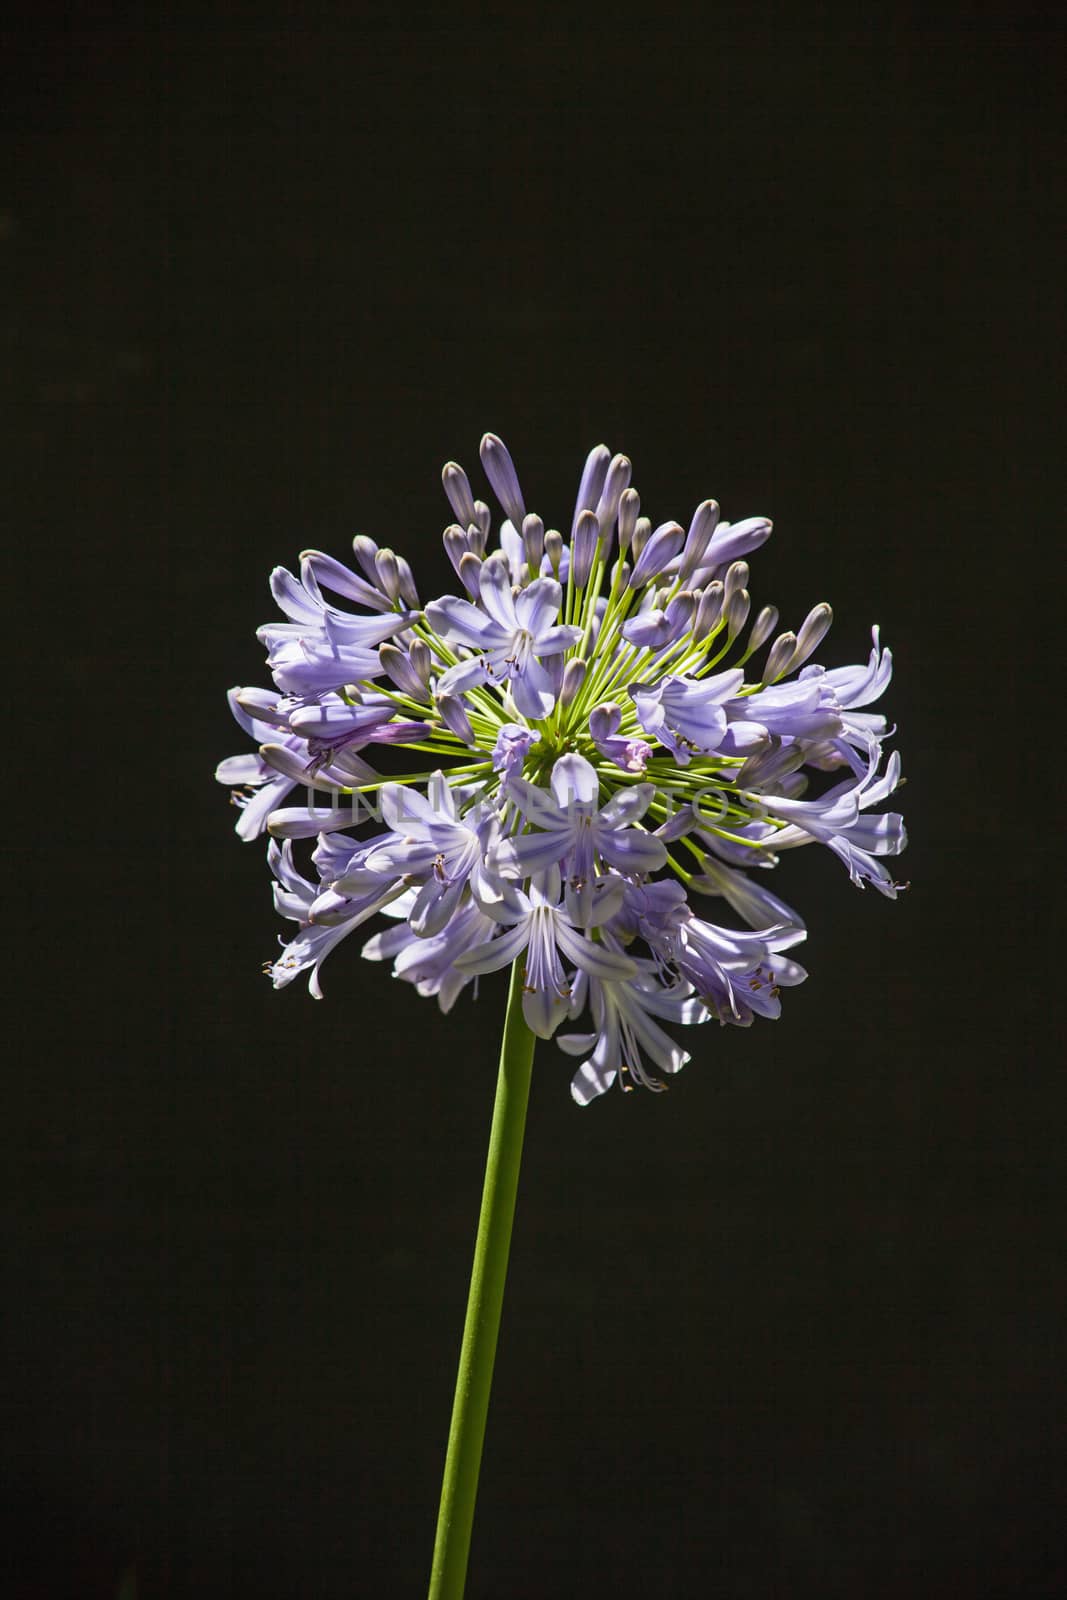 Inflorescence of Agapanthus praecox 13096 by kobus_peche